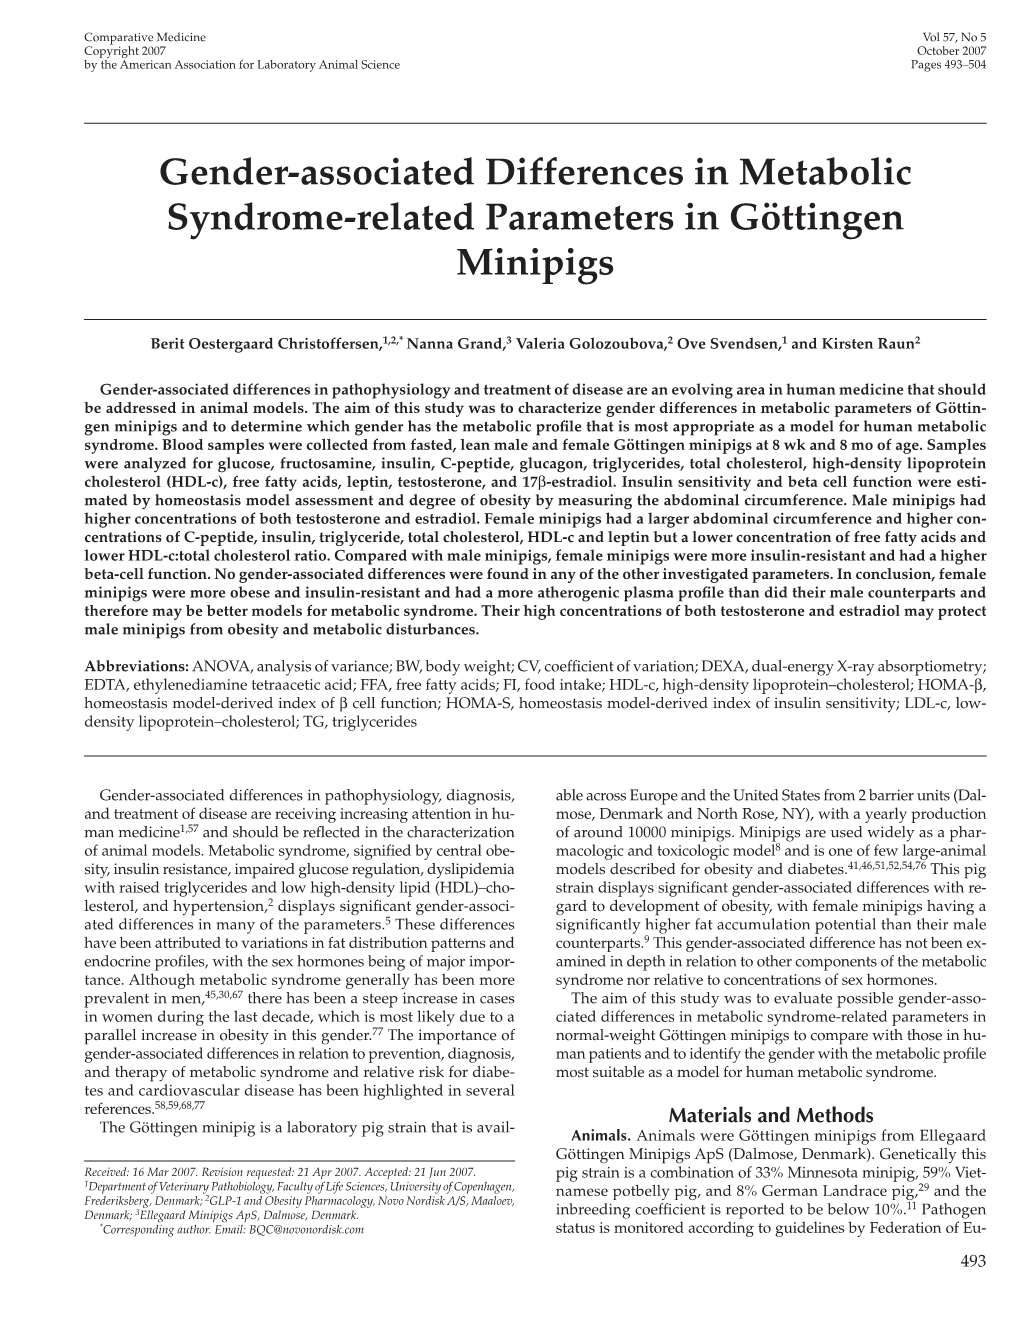 Gender-Associated Differences in Metabolic Syndrome-Related Parameters in Göttingen Minipigs